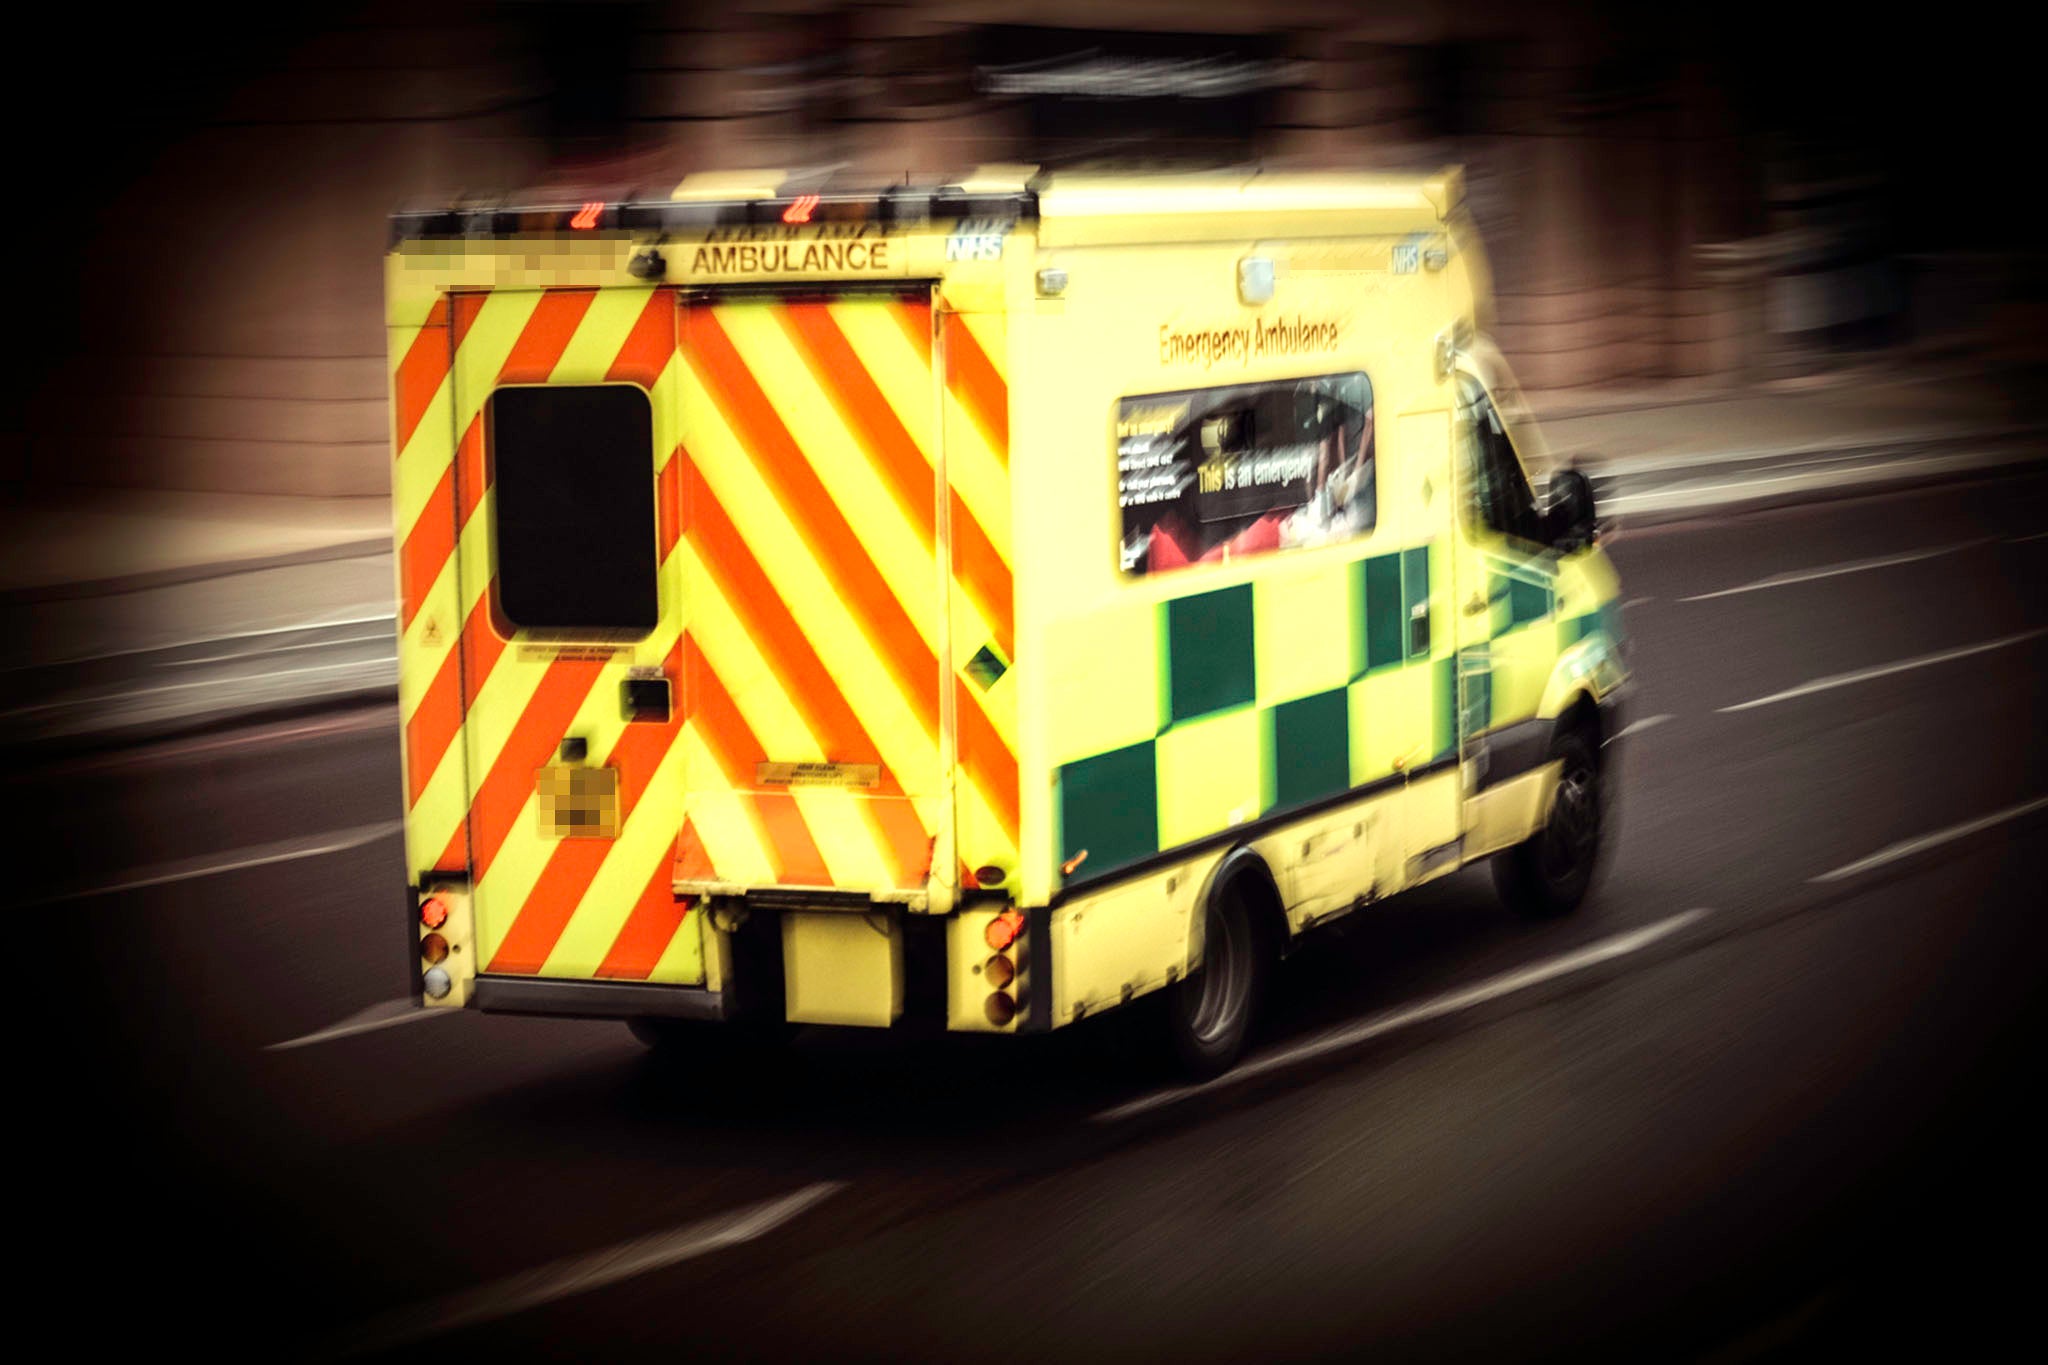 NHS England first triggered the review following ‘extreme challenges’ faced by ambulance services in 2021 and 2022